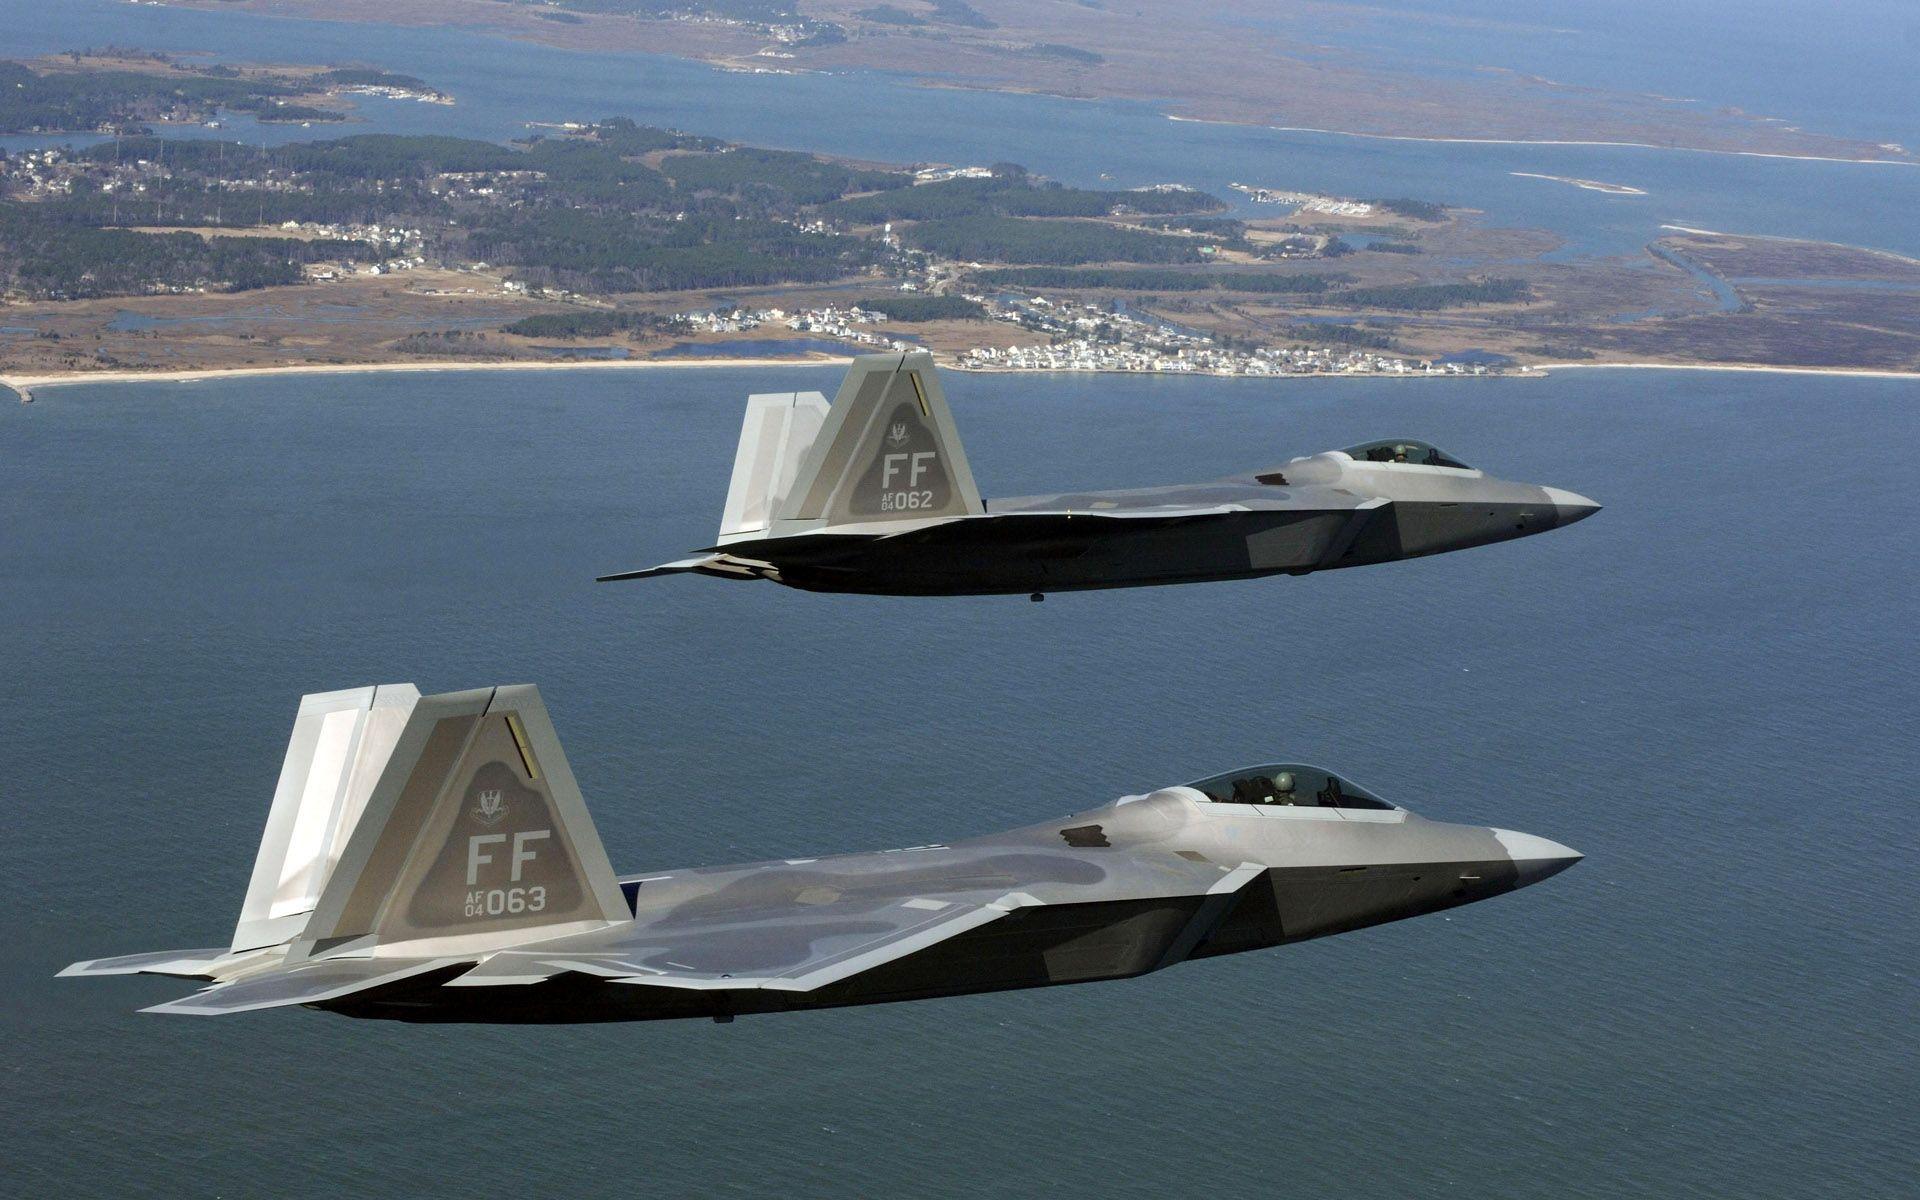 Watch This Insane Slow Motion Video Of The F22 Raptor Filmed At 1000 FPS   The Aviationist